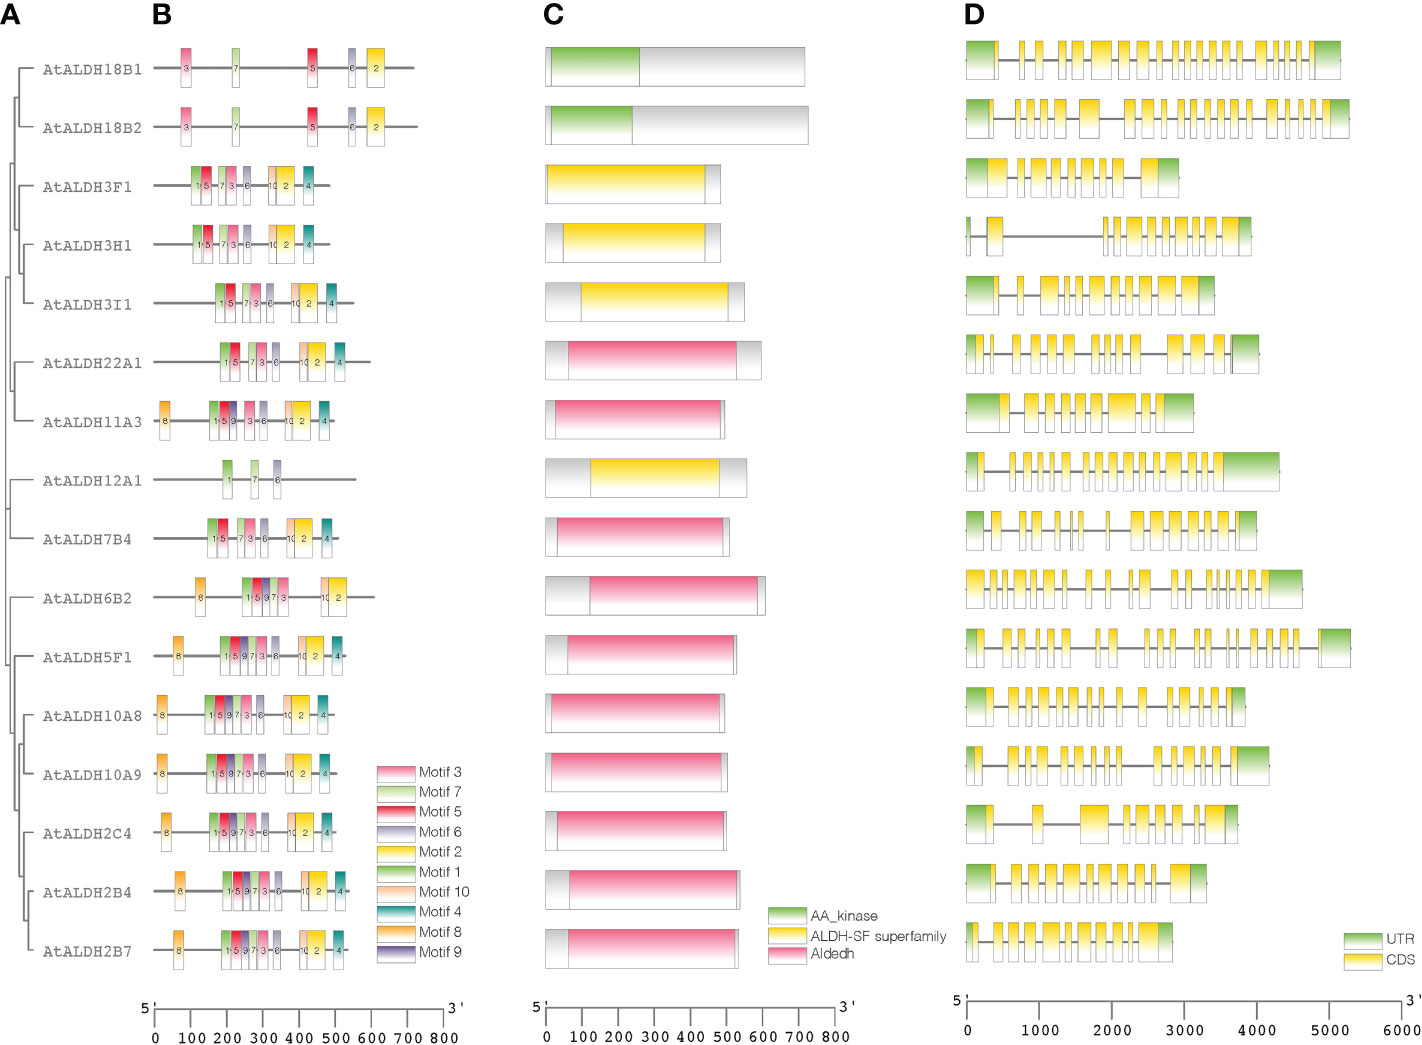 Frontiers | Comparative genomic analysis of the aldehyde dehydrogenase ...